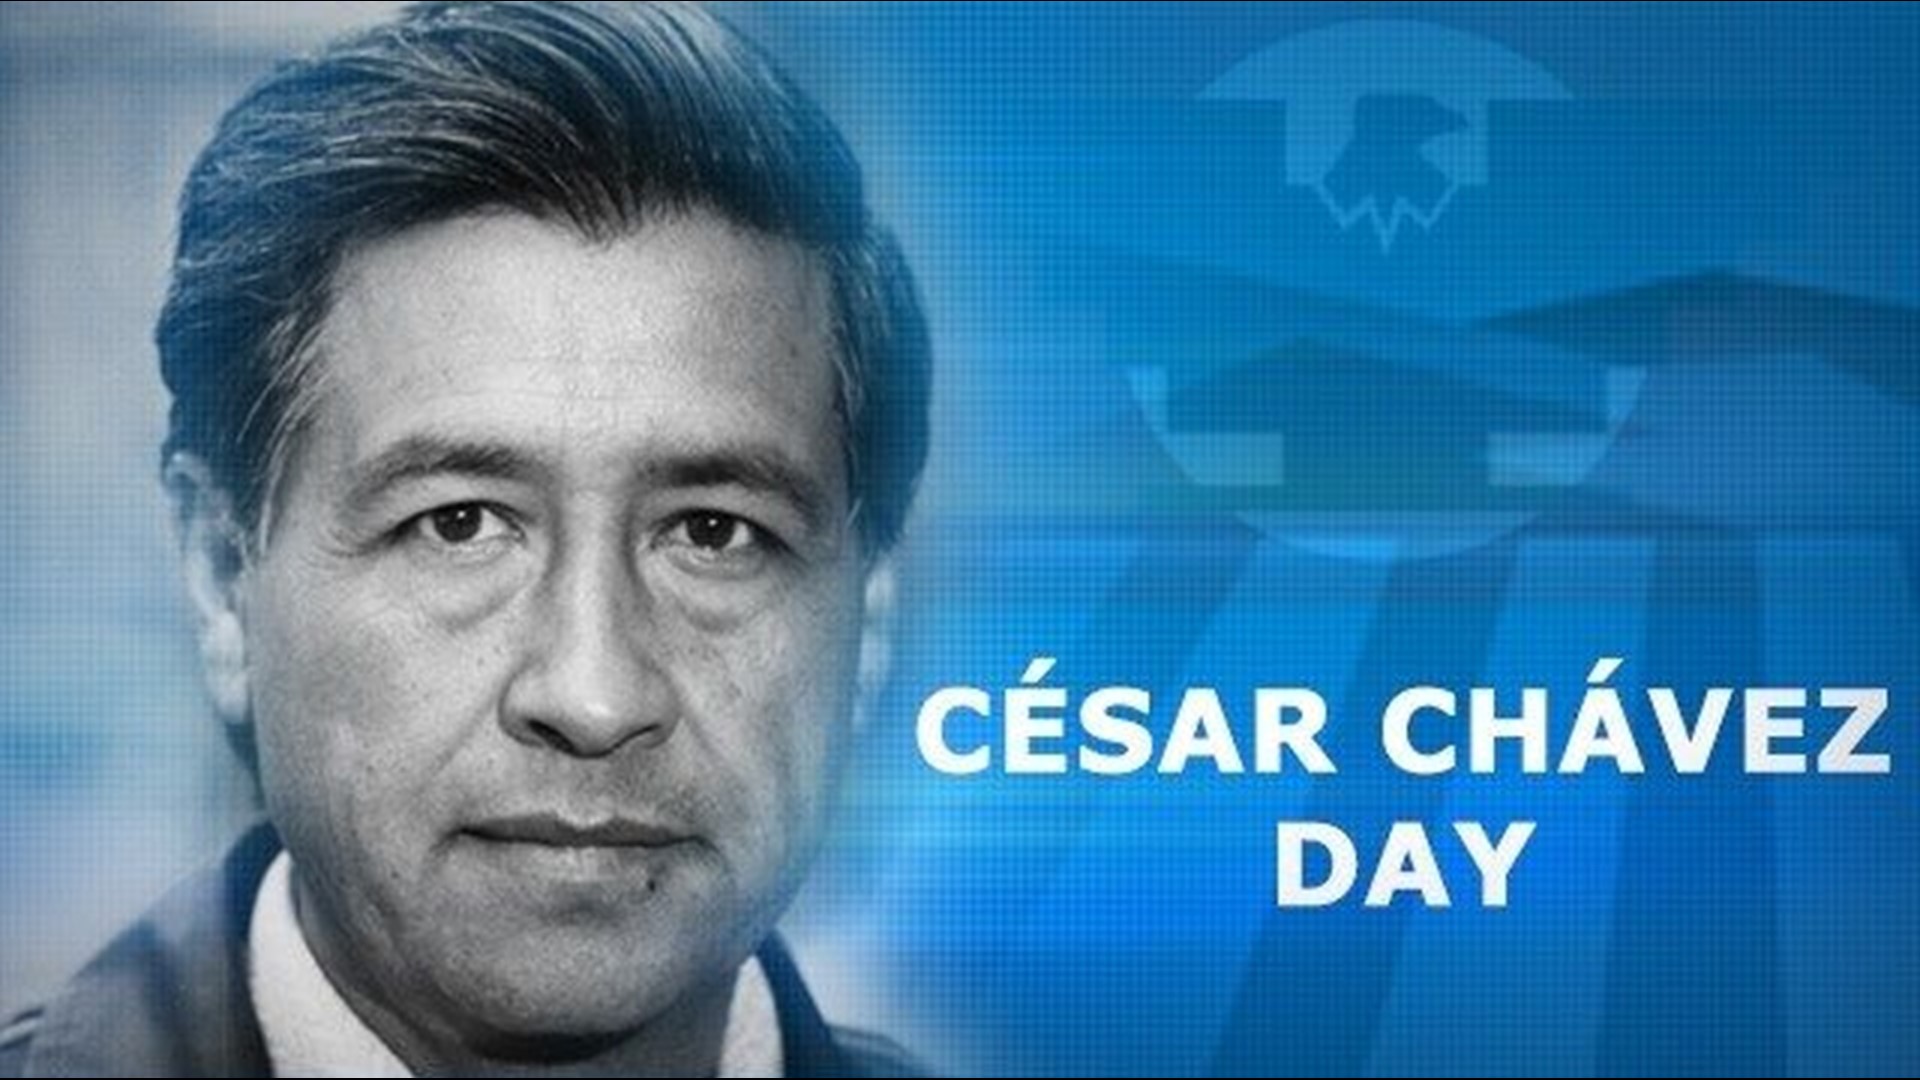 County offices close for Cesar Chavez Day